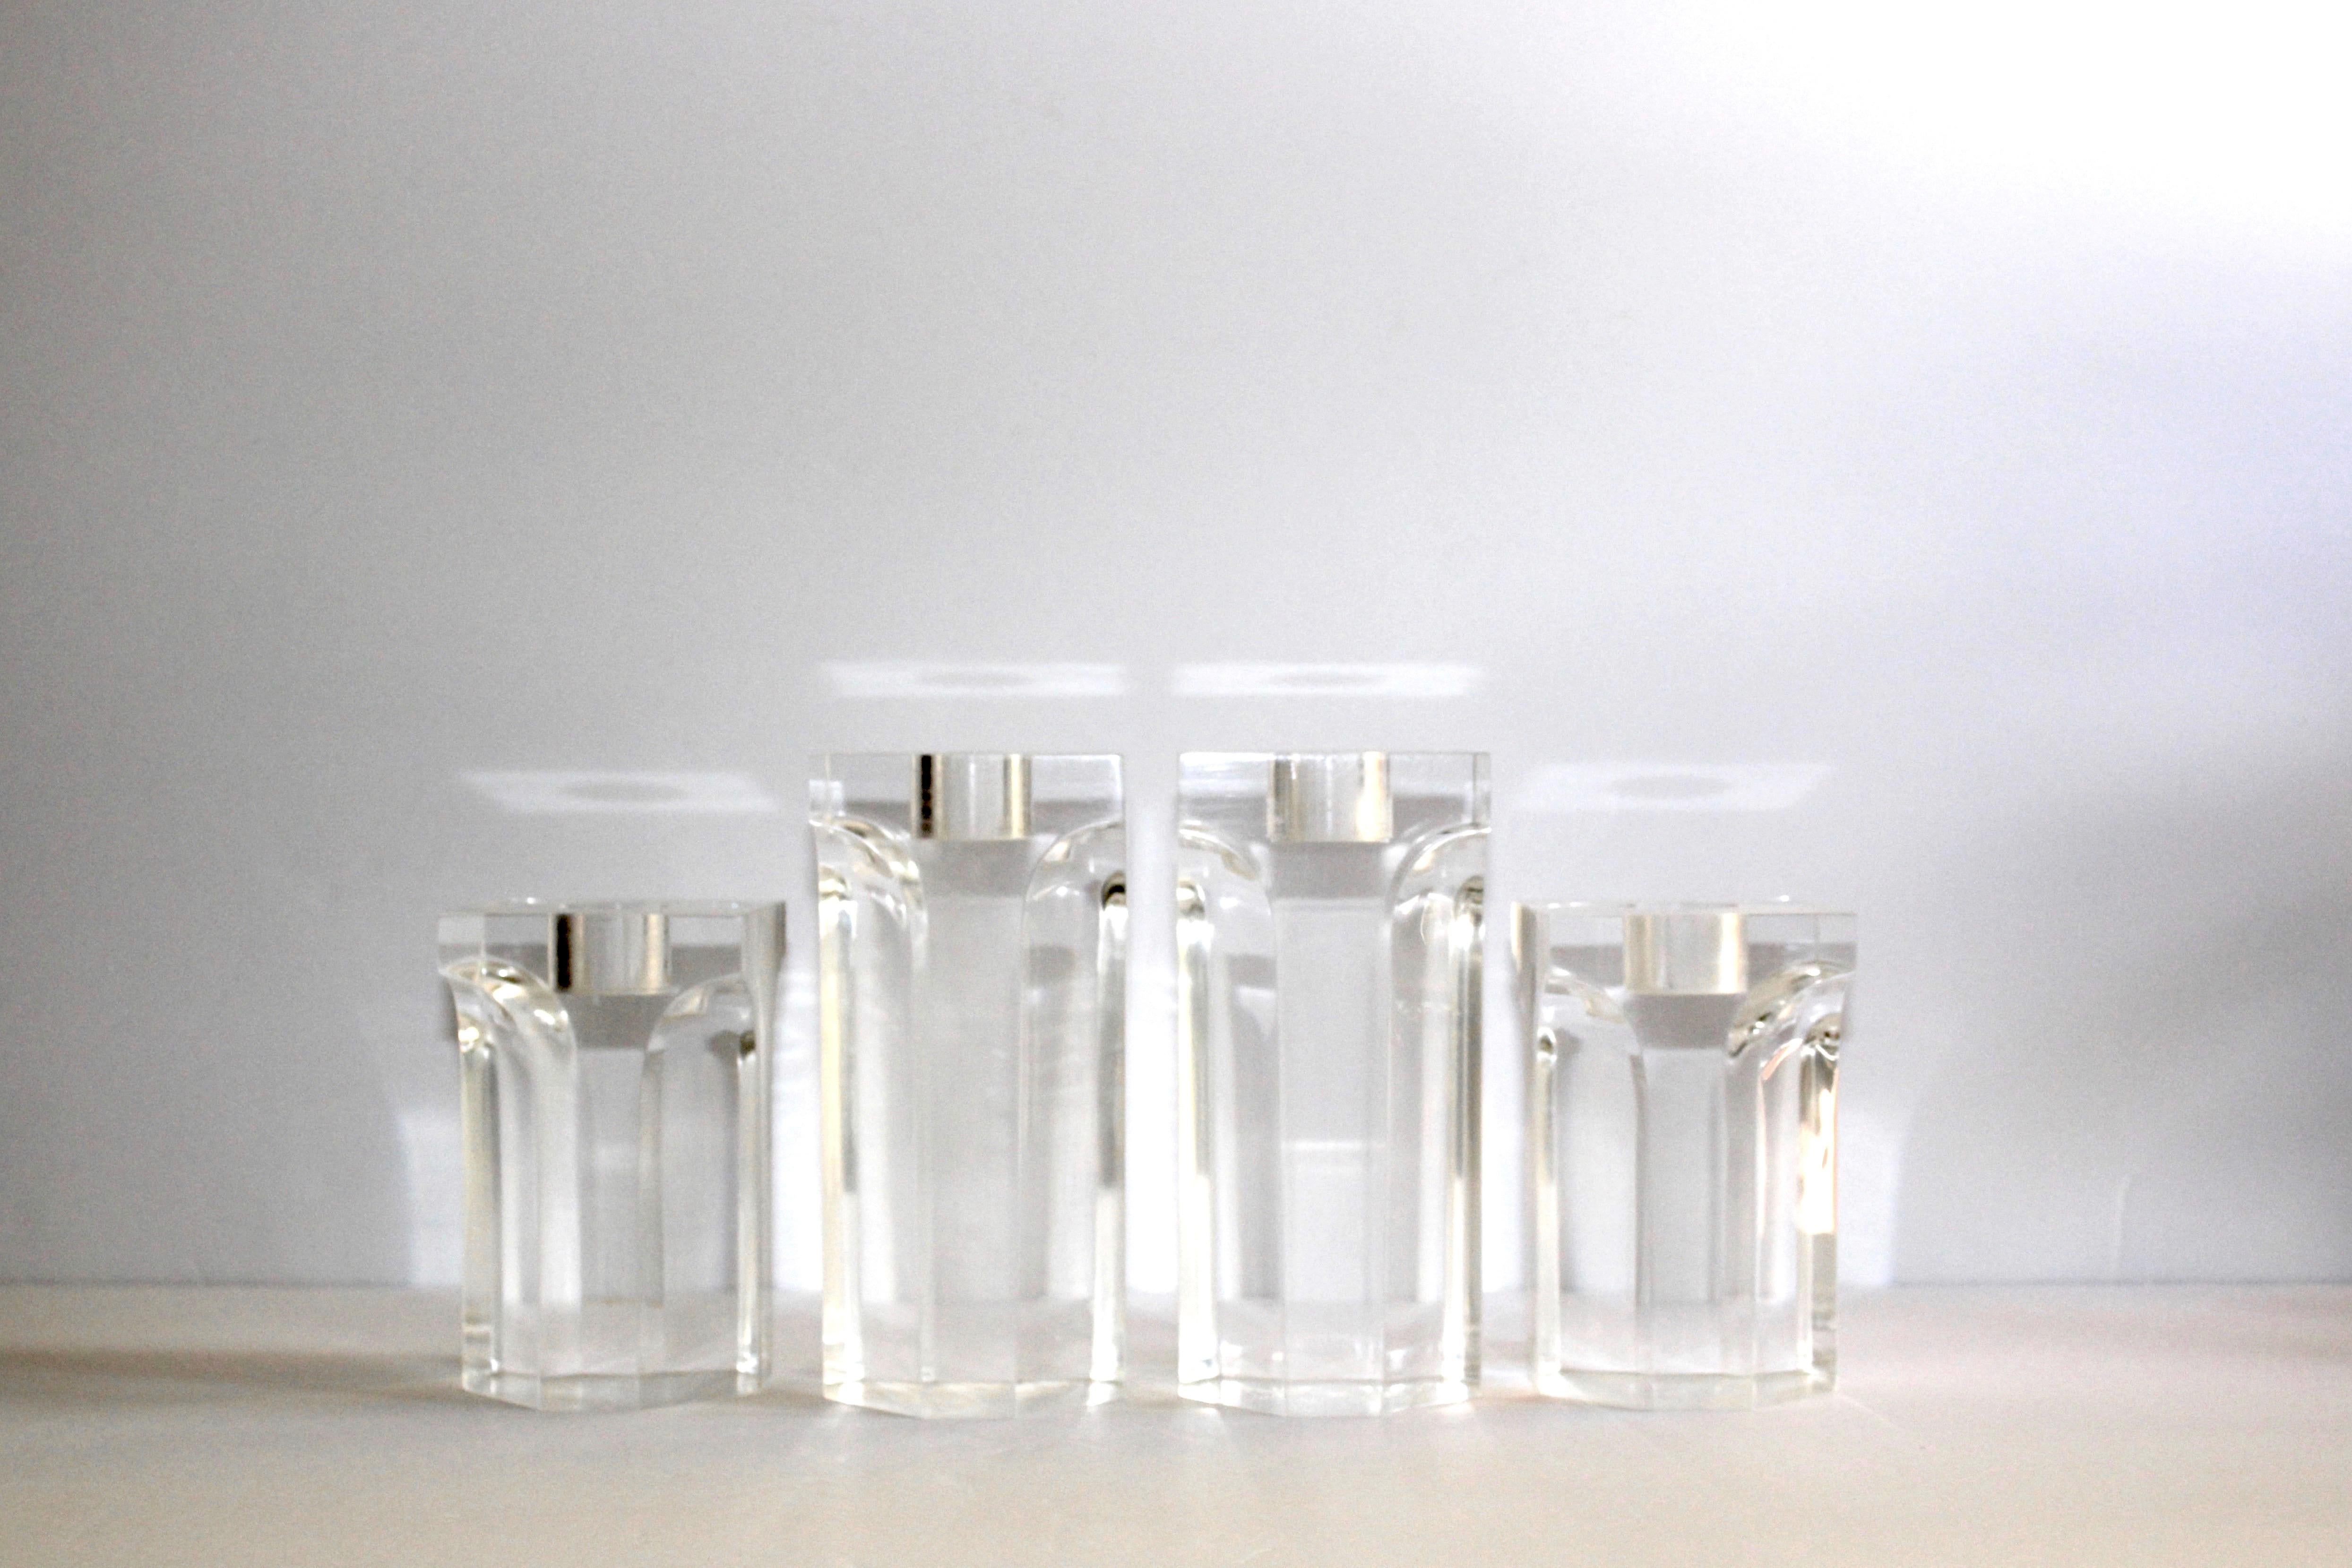 American Set of Four Vintage Architectural Lucite Candleholders, 1970s